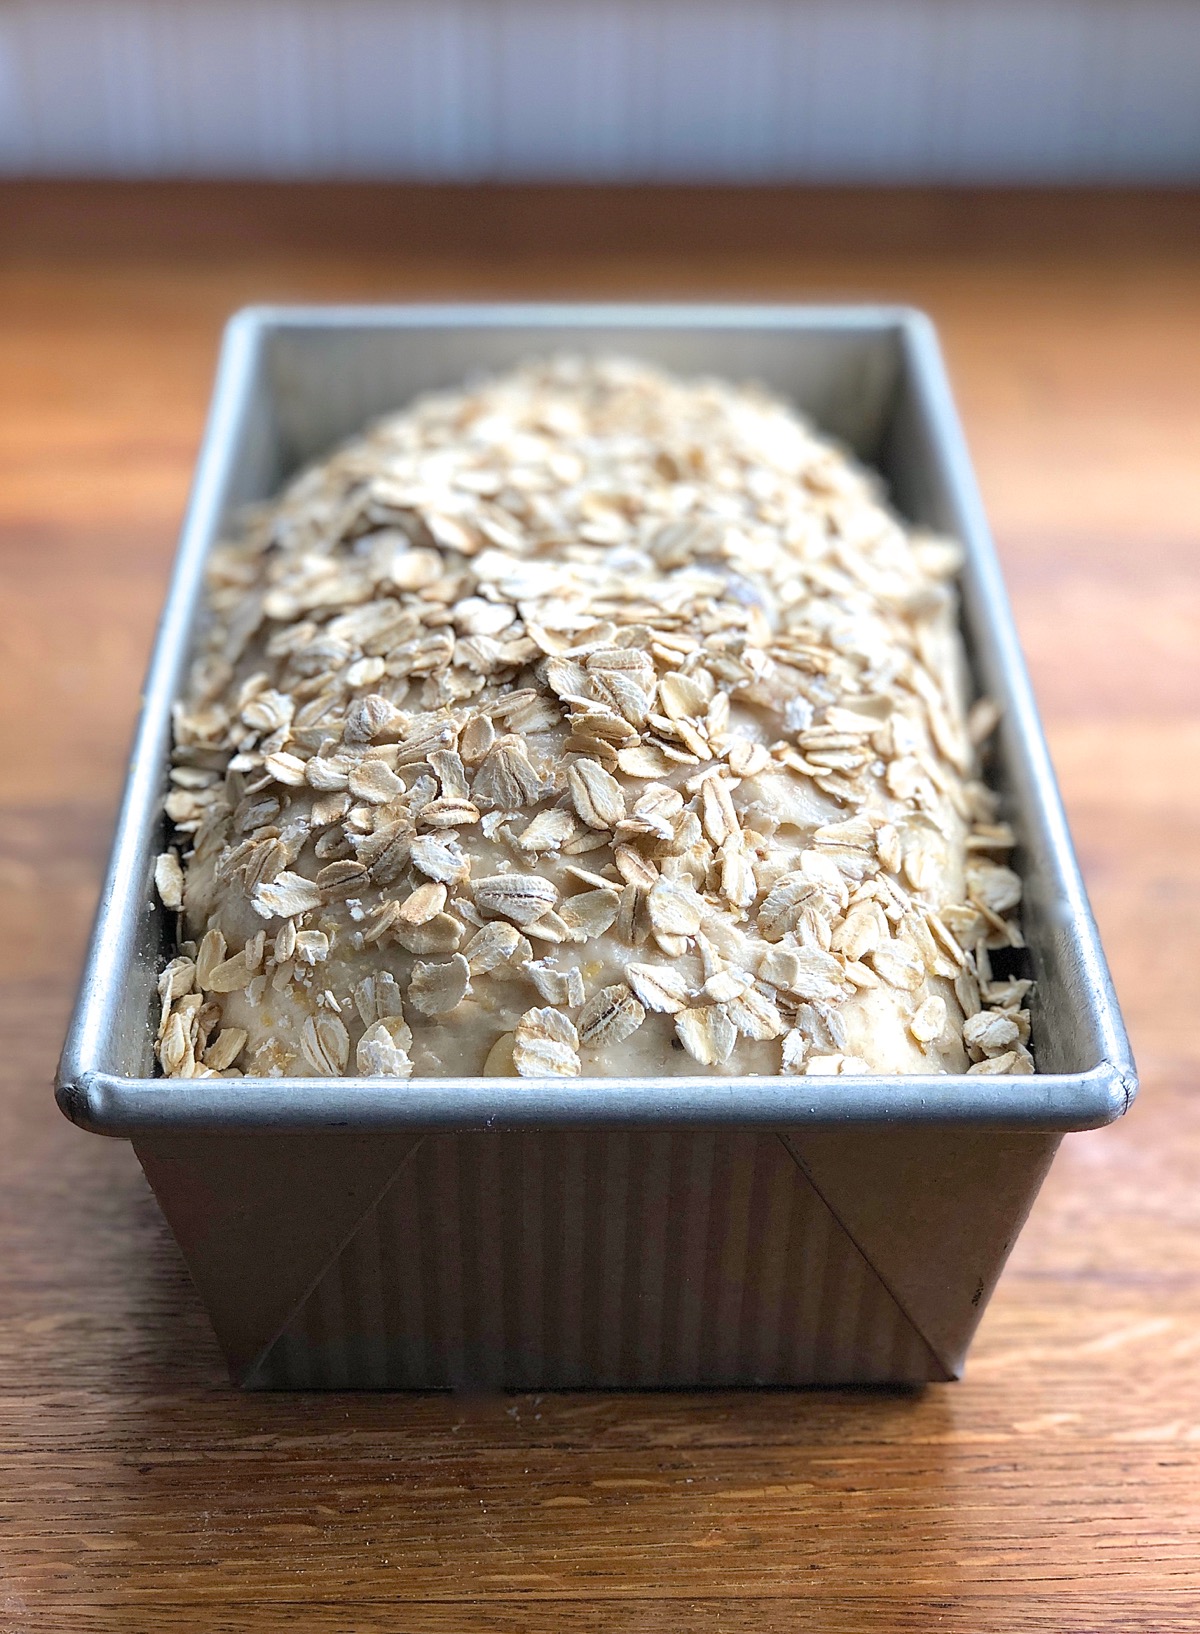 A garnish of oats sprinkled atop a risen loaf of oatmeal bread before baking